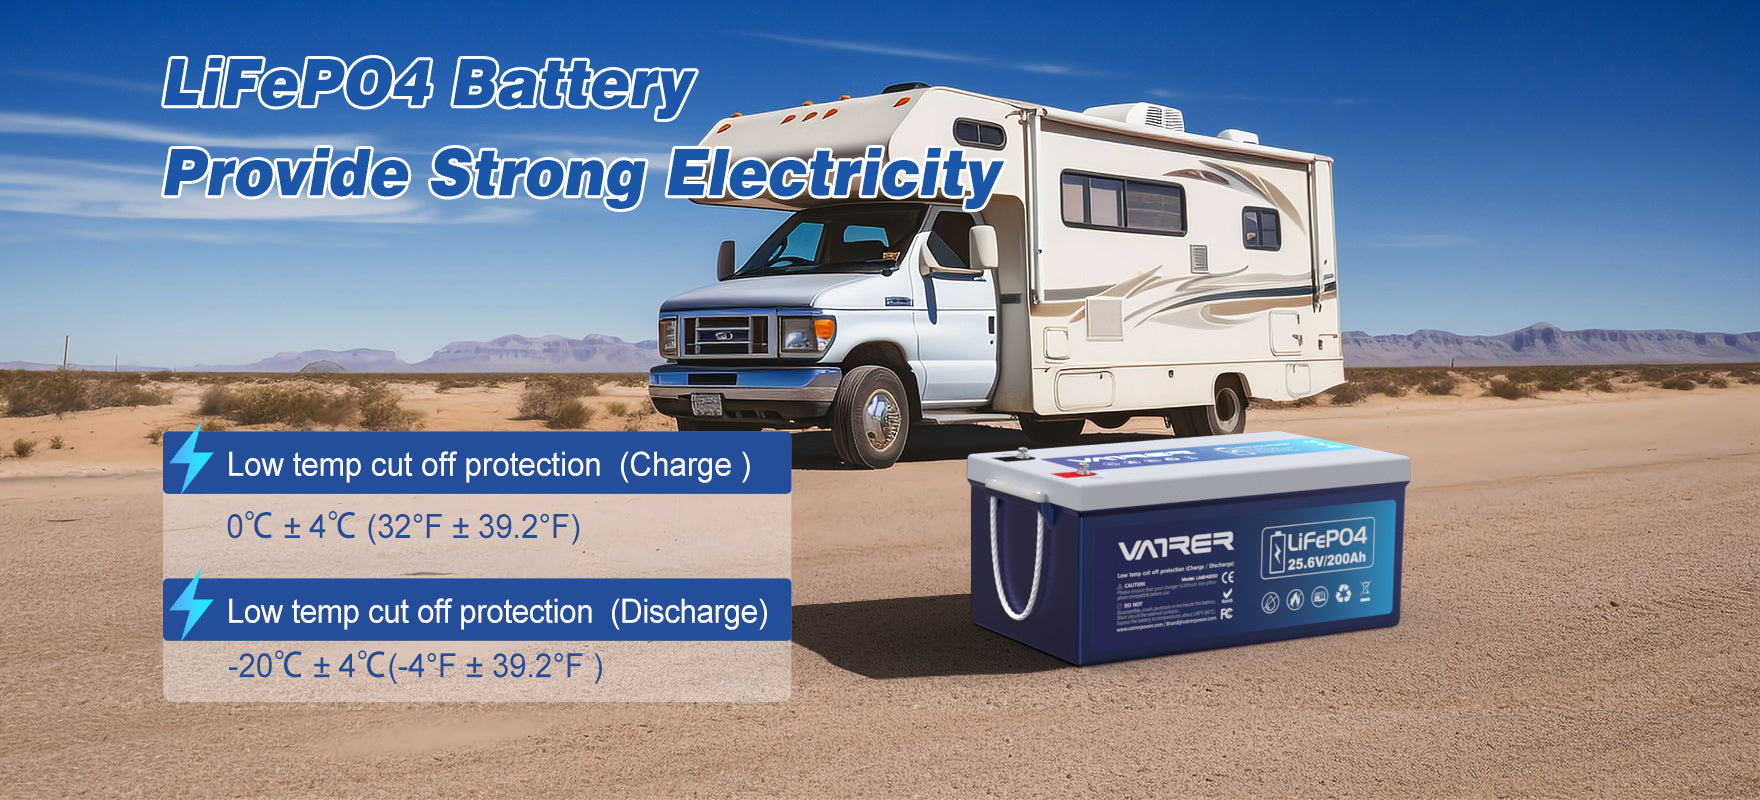 LiFeP04 Battery Provfide Strong Electricity